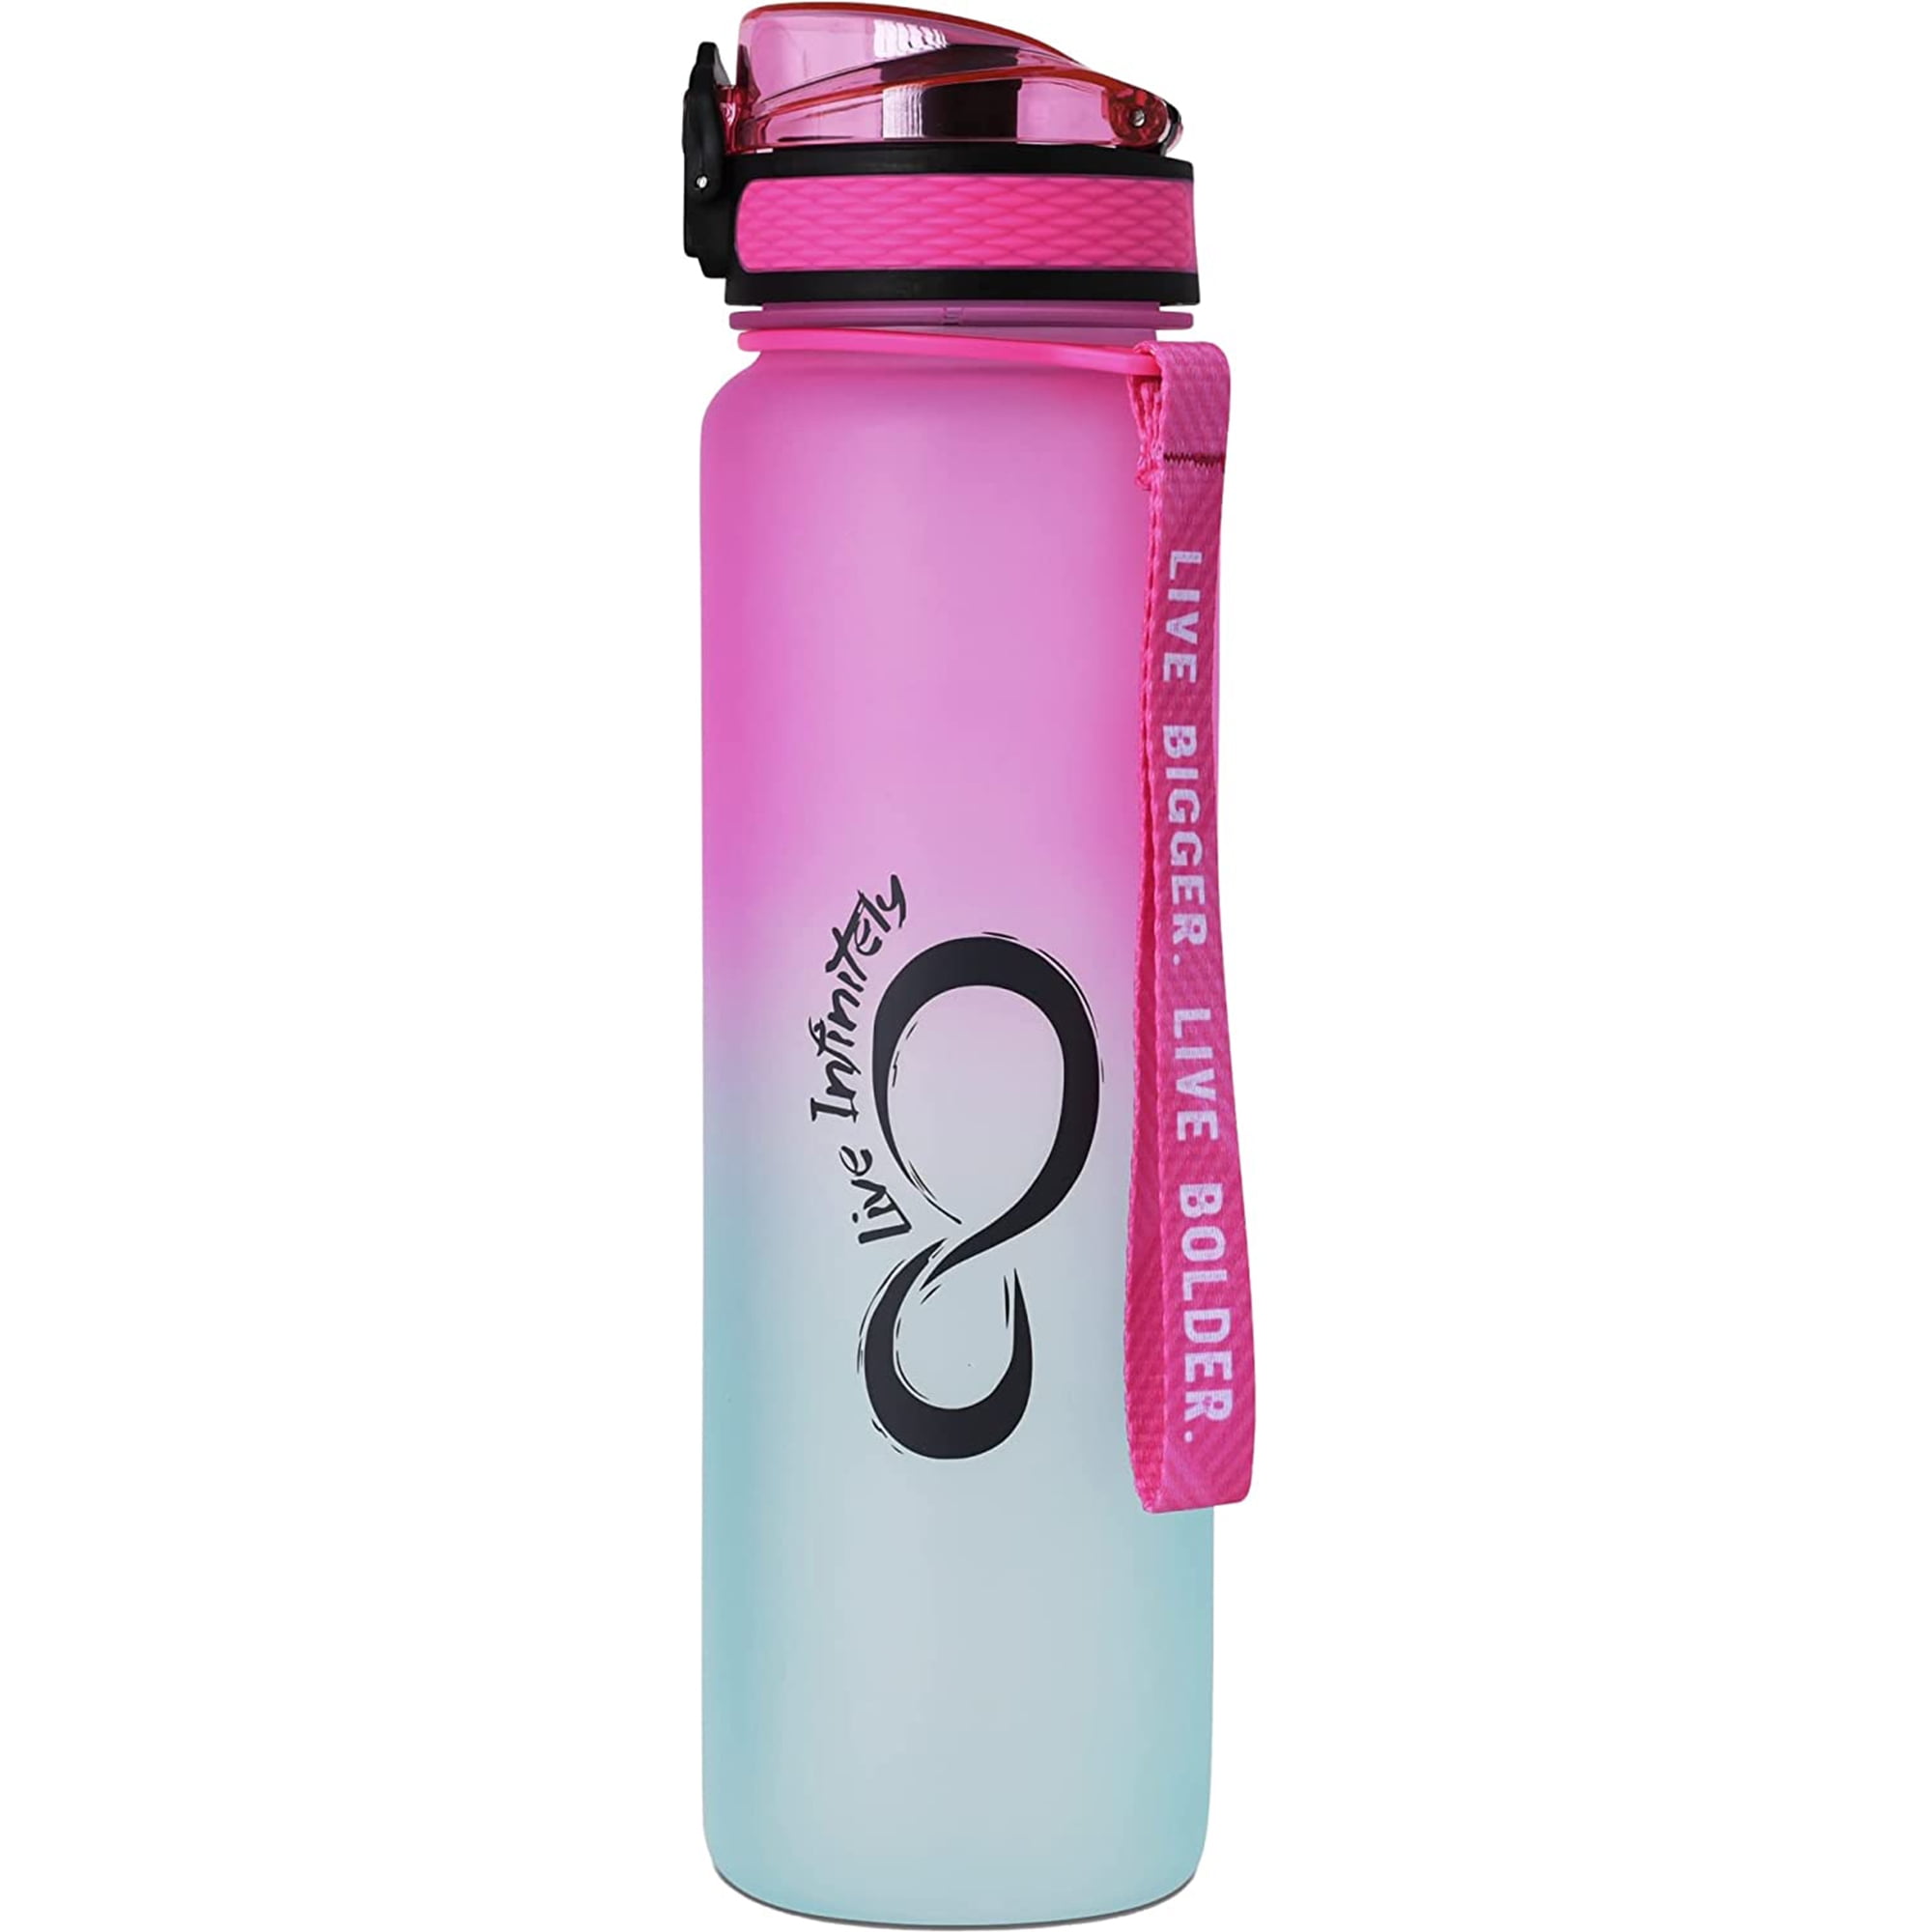 Live Infinitely Insulated Water Bottle with Time Marker BPA-Free 24 oz Rose, Size: 24oz, Pink